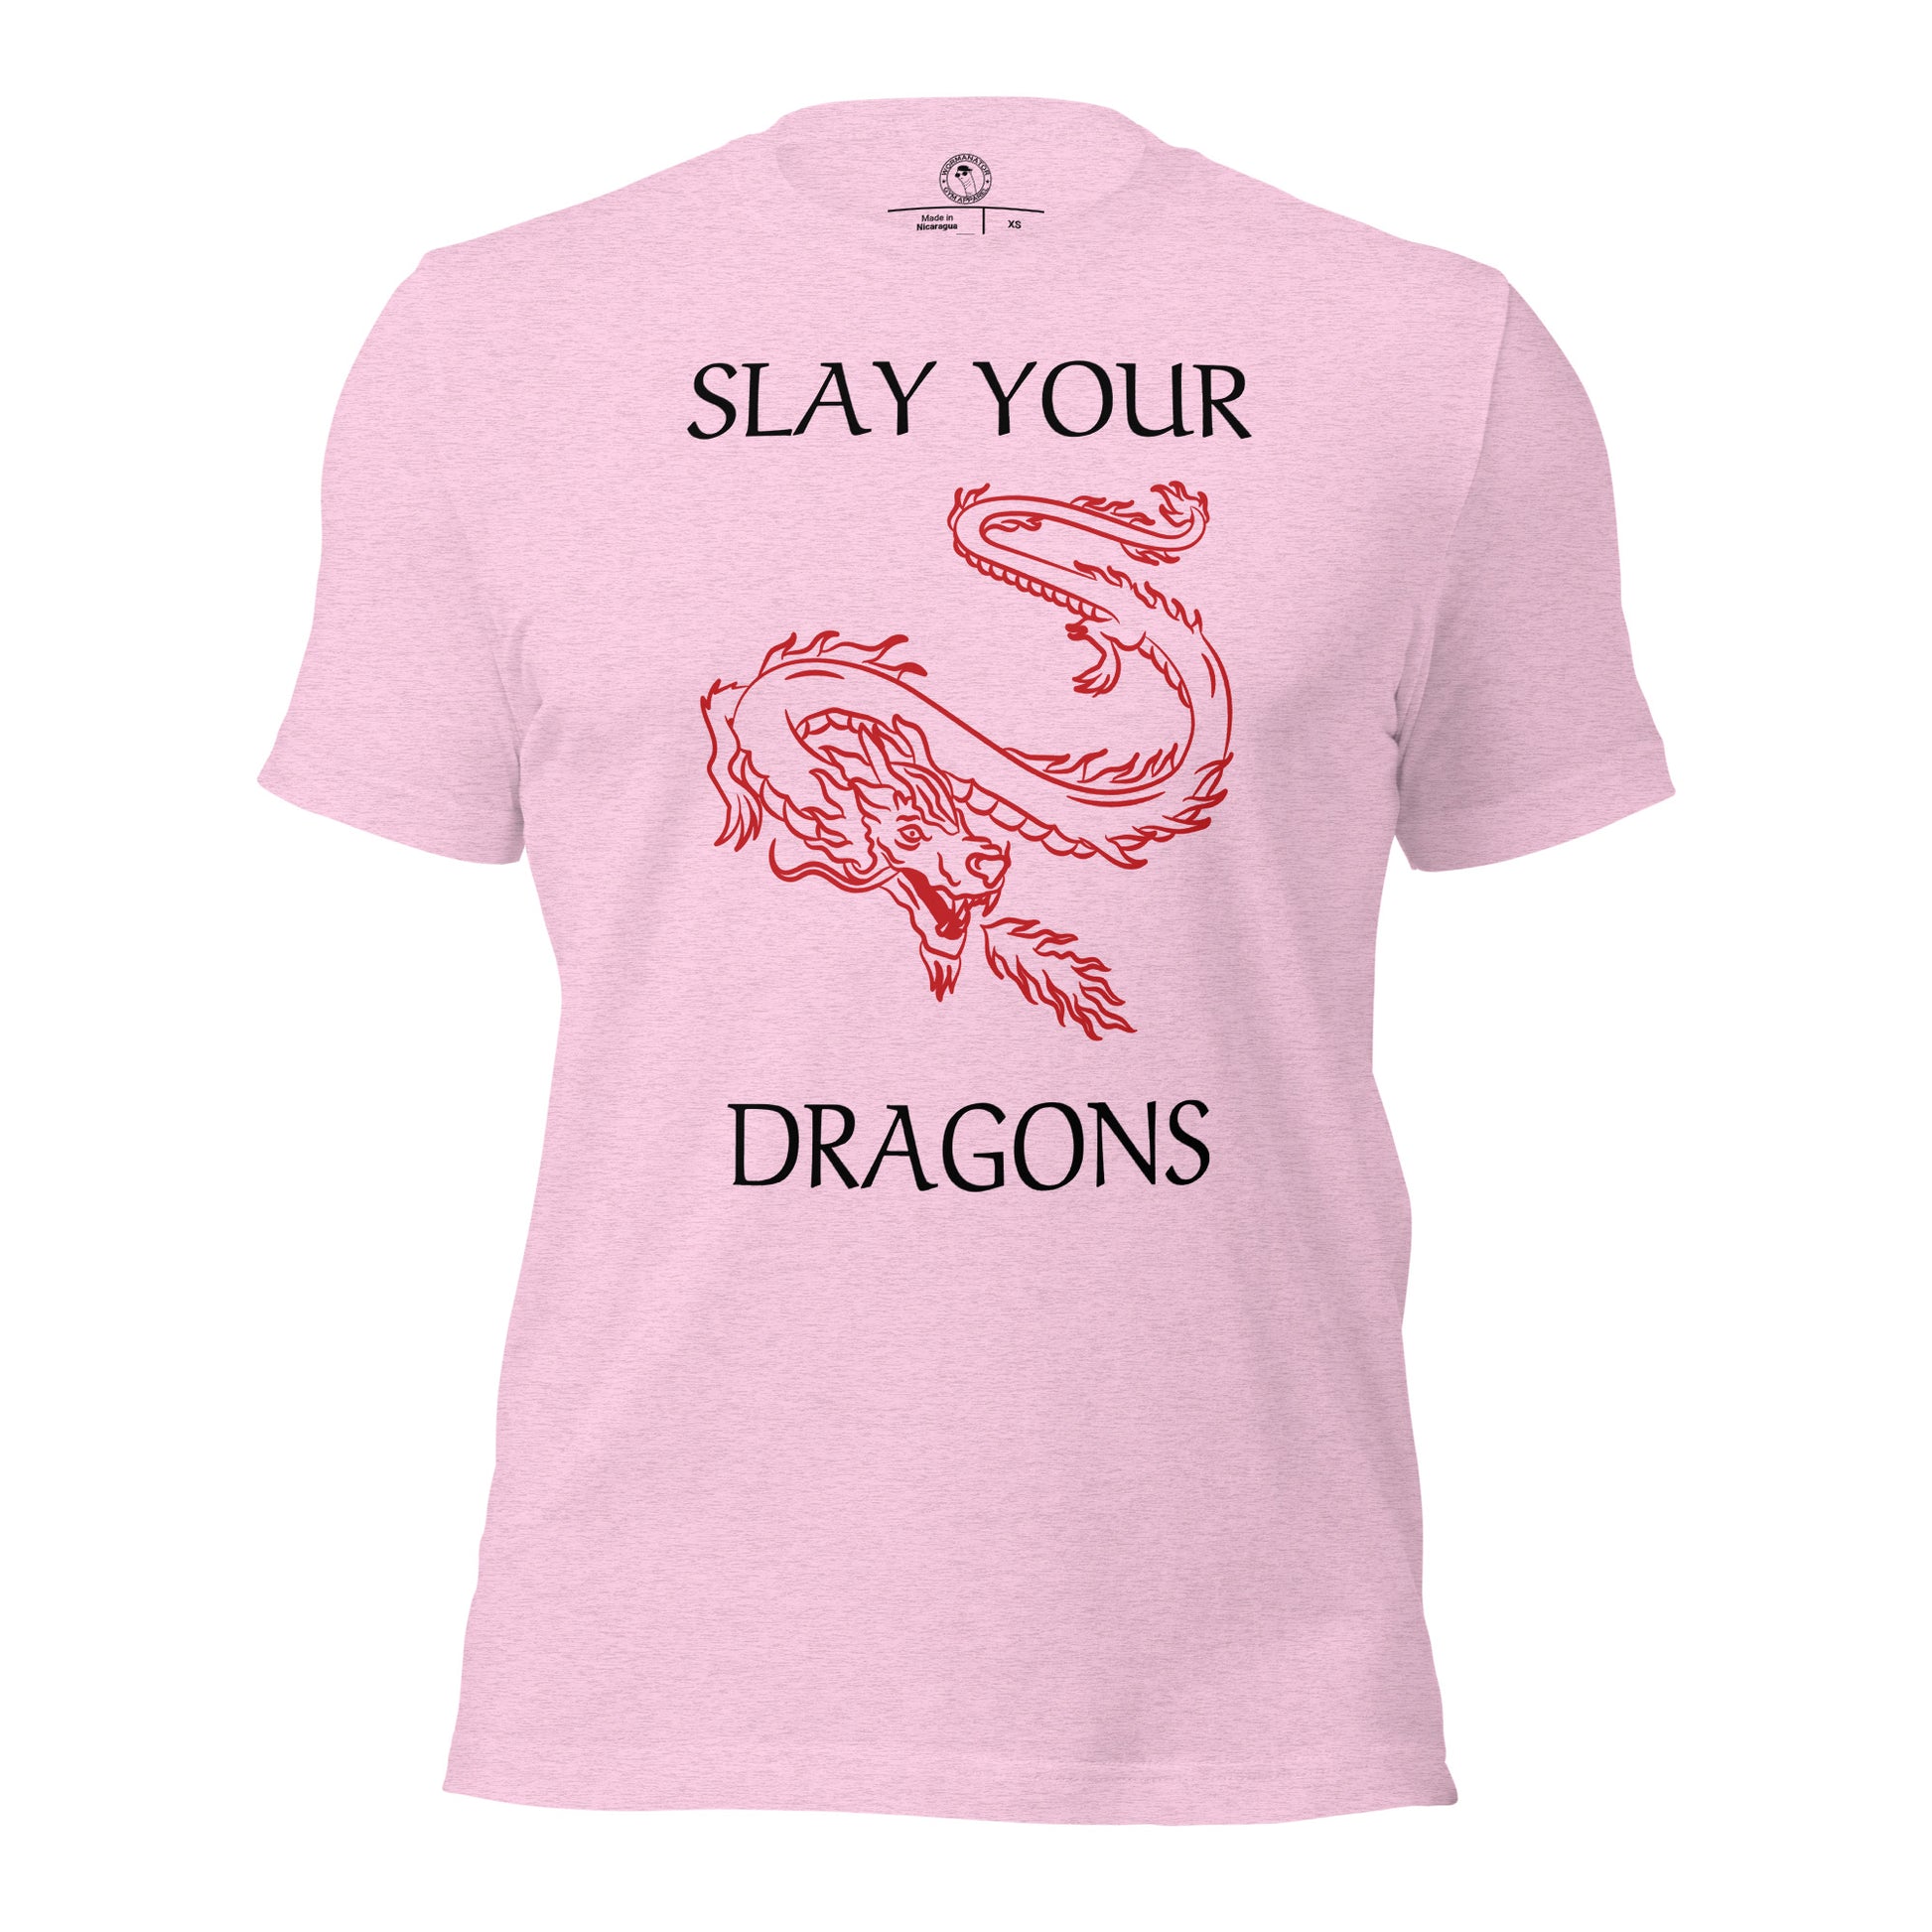 Slay Your Dragons Shirt in Heather Prism Lilac